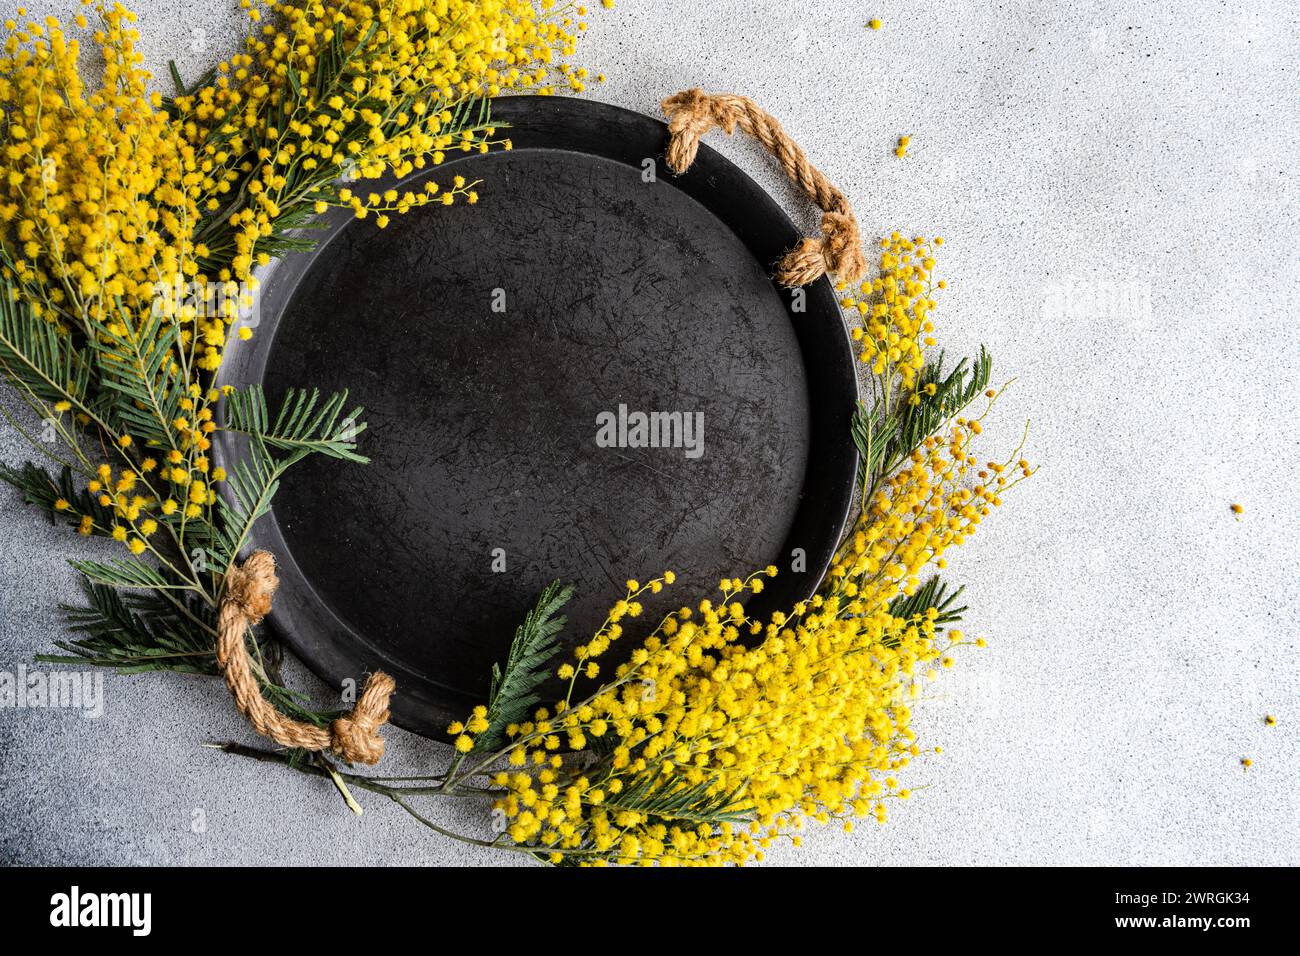 Overhead view of yellow mimosa flowers tied around a rustic metal tray on a table Stock Photo